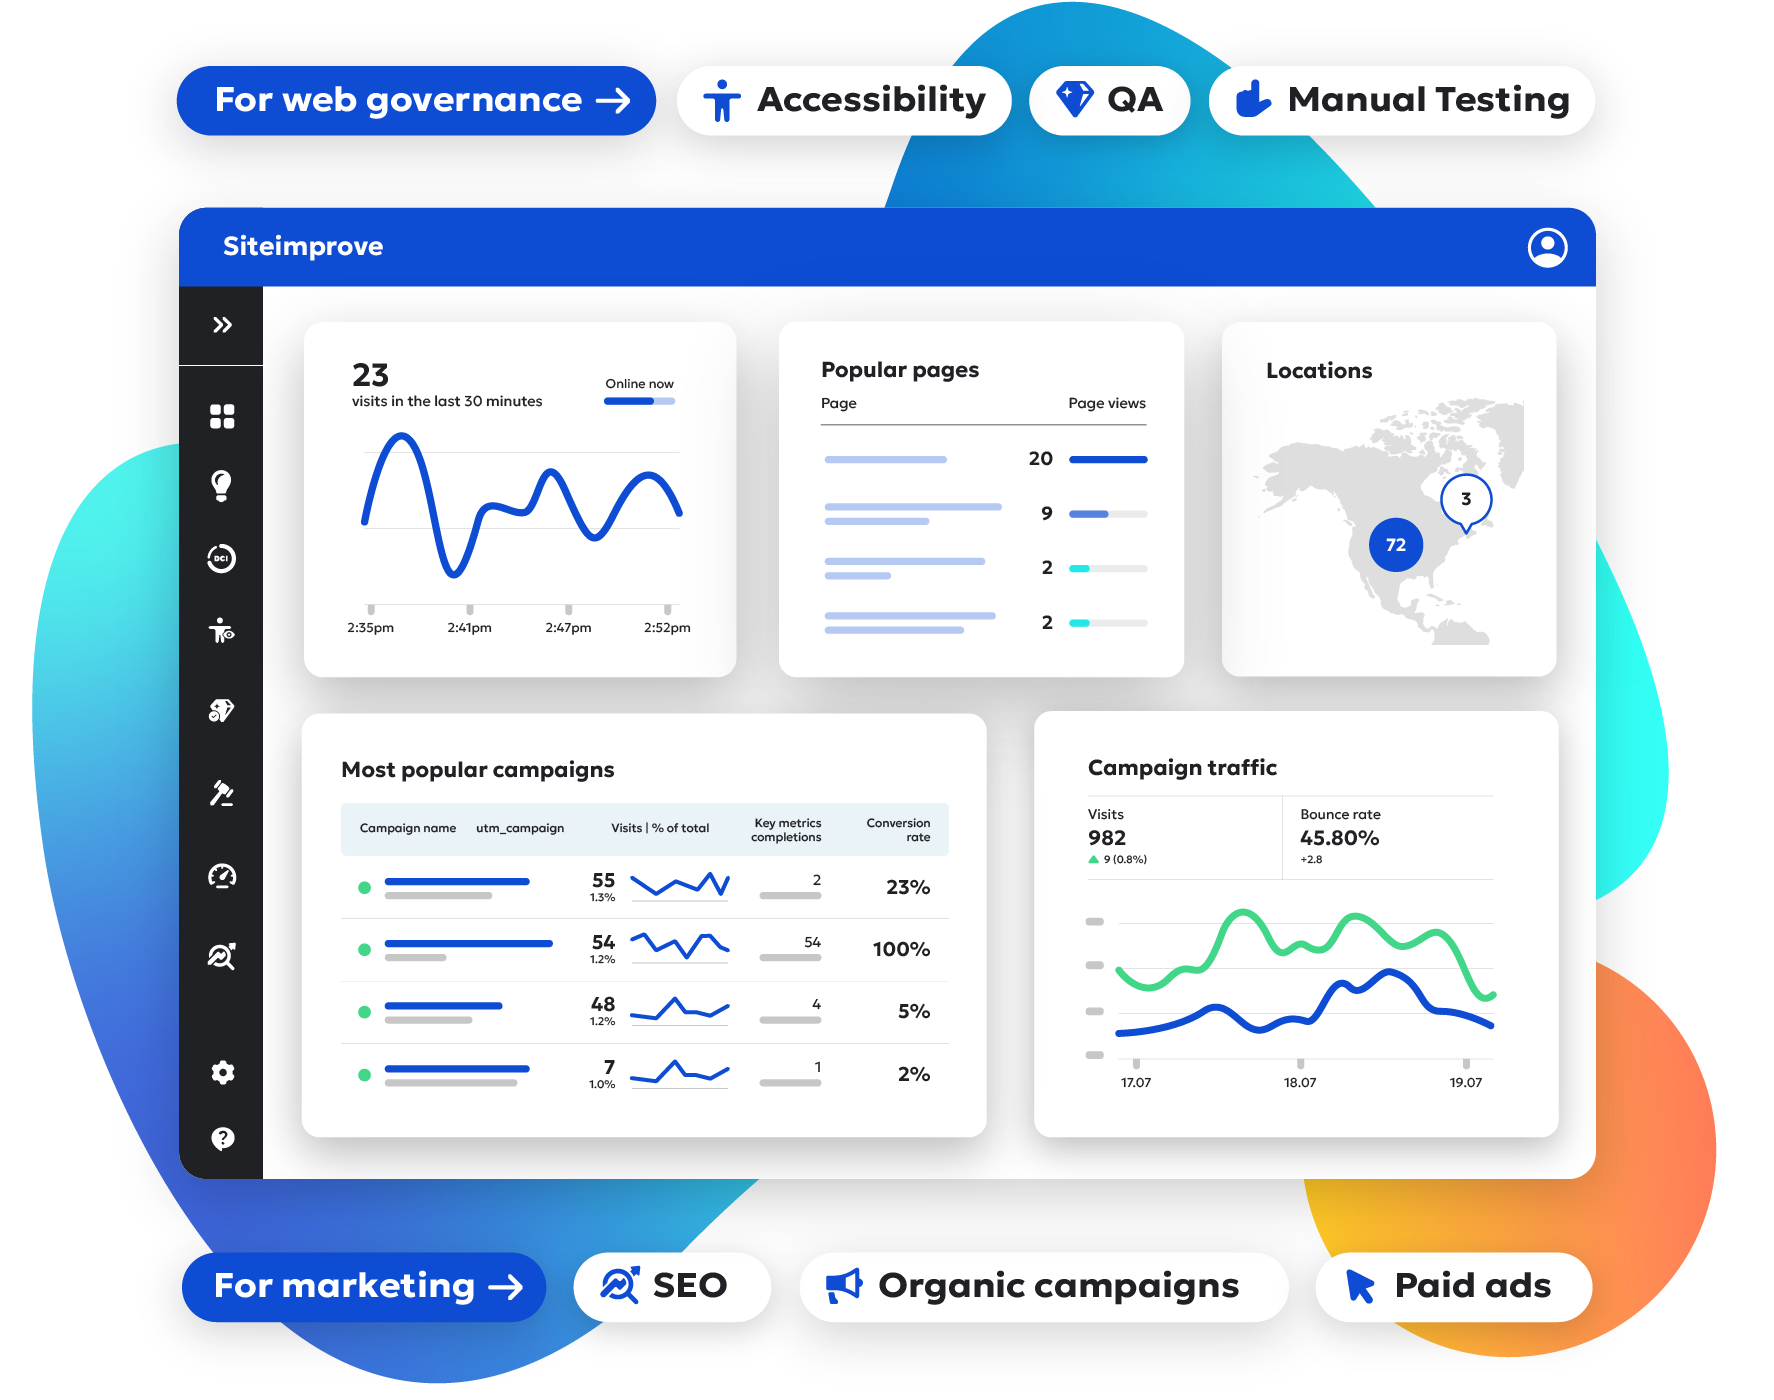 Siteimprove dashboard displaying various seo, accessibility, and quality assurance metrics, including charts and data points.